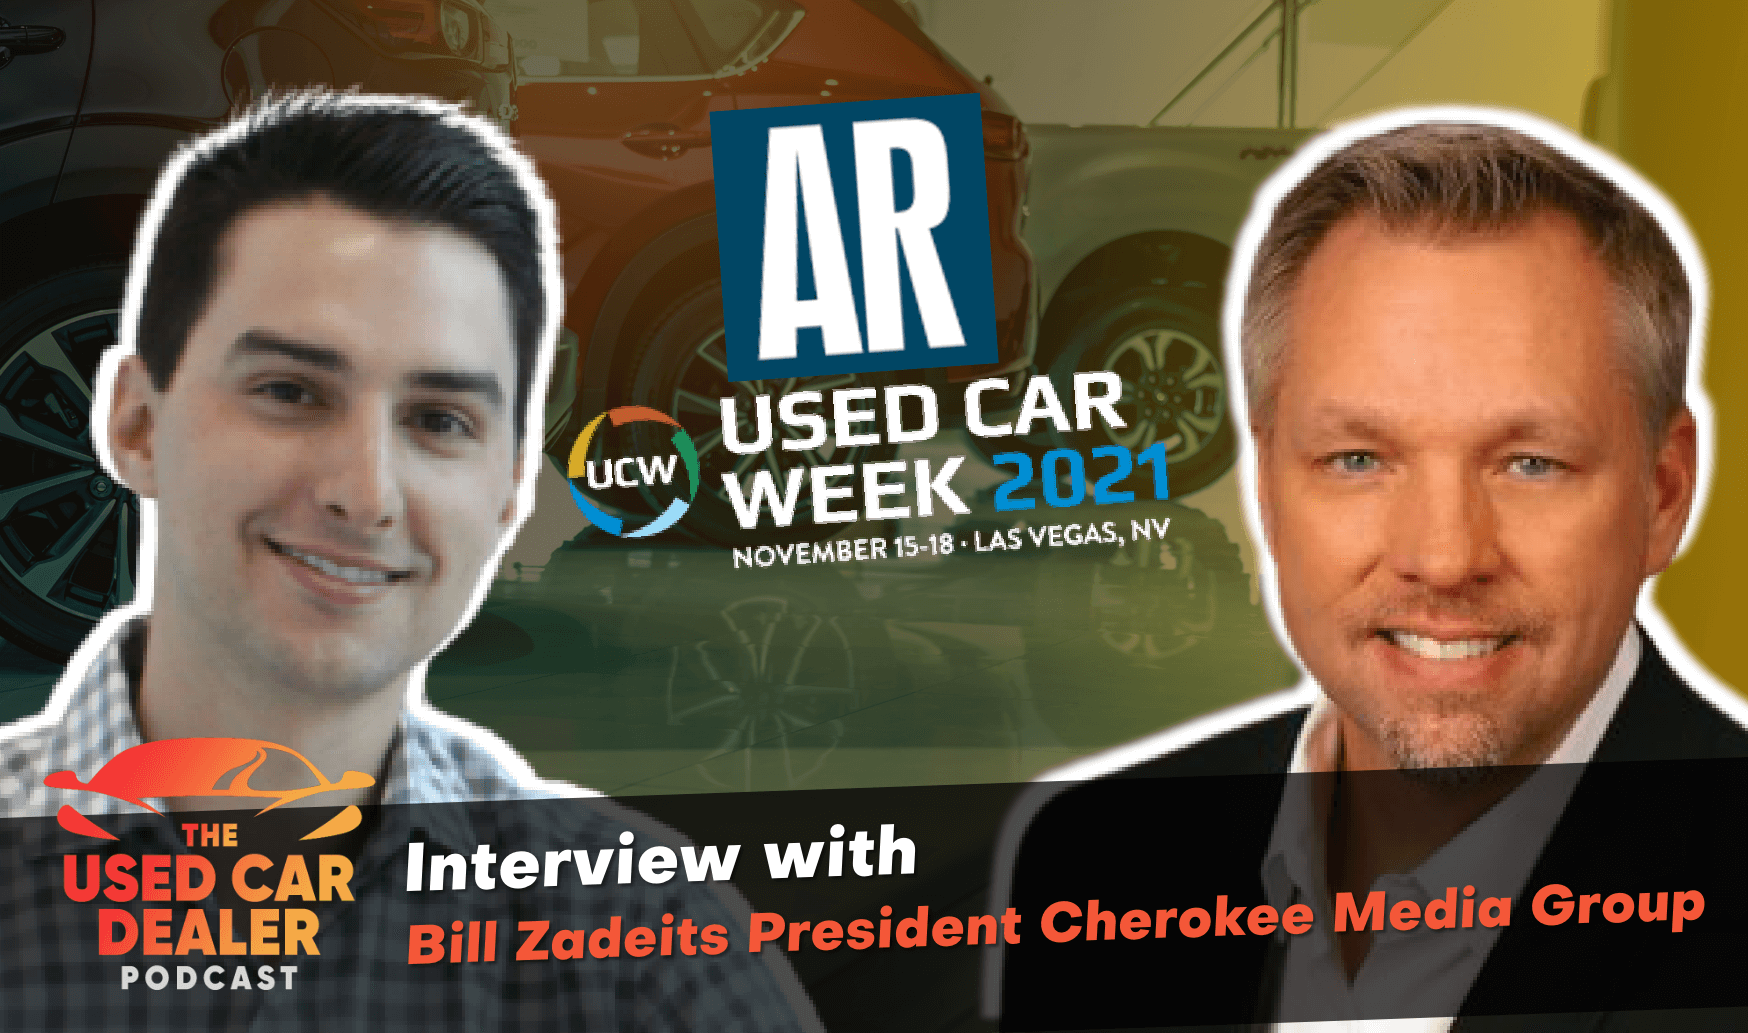 Interview with Bill Zadeits on Used Car Week and Auto Remarketing